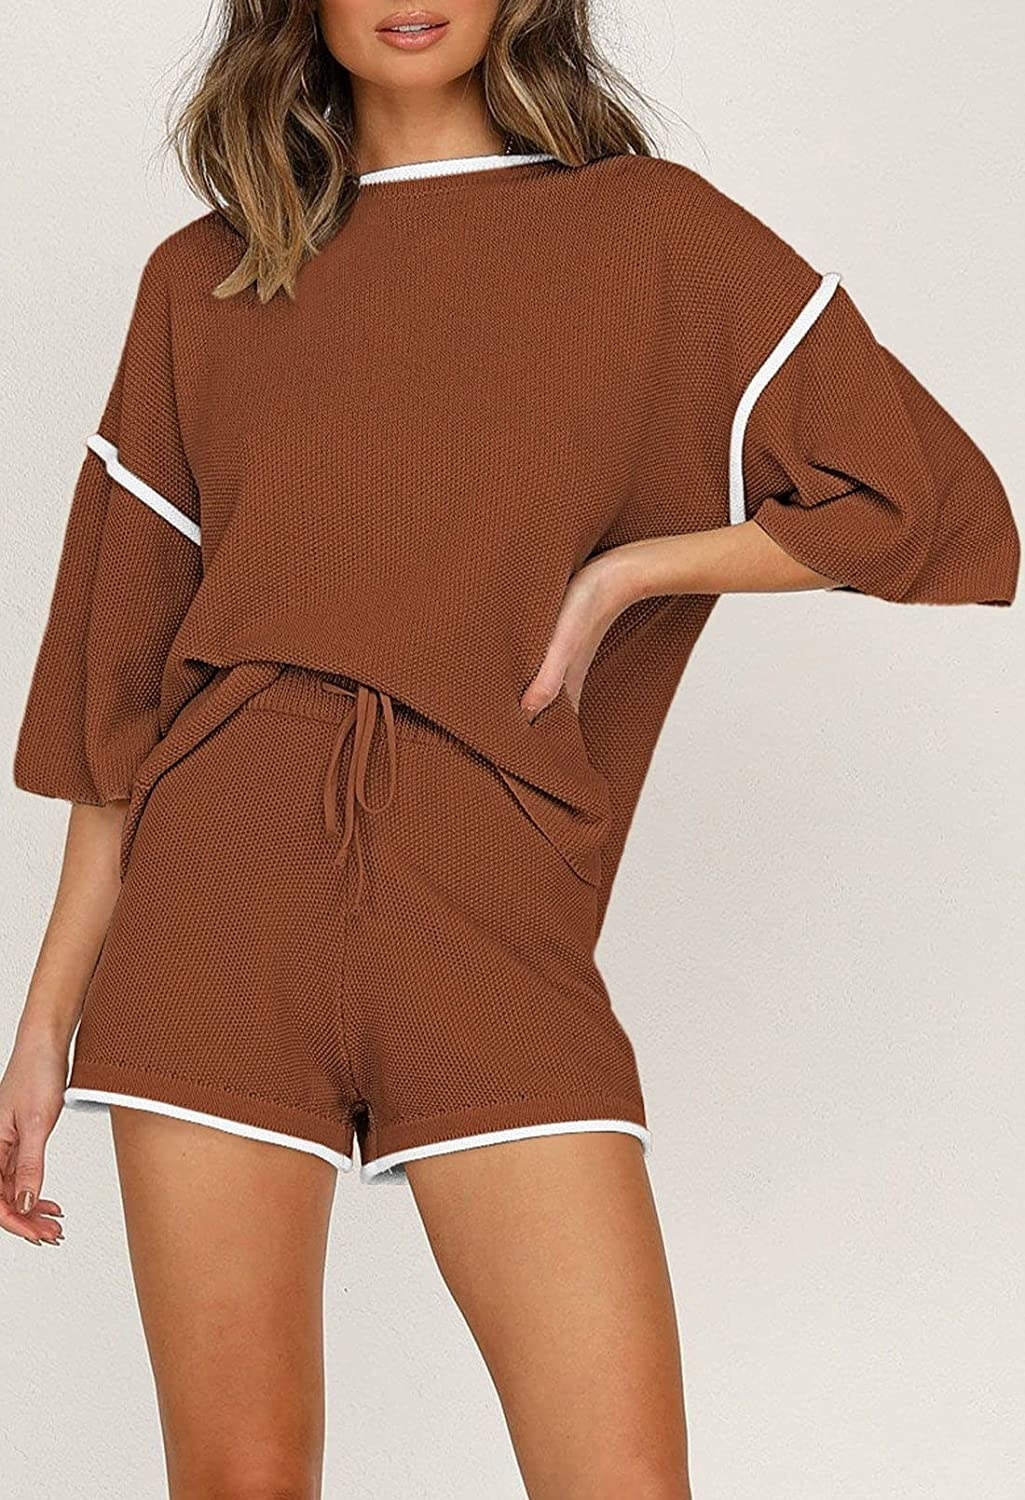 a model wearing the brown and white oversized knit shirt and matching shorts